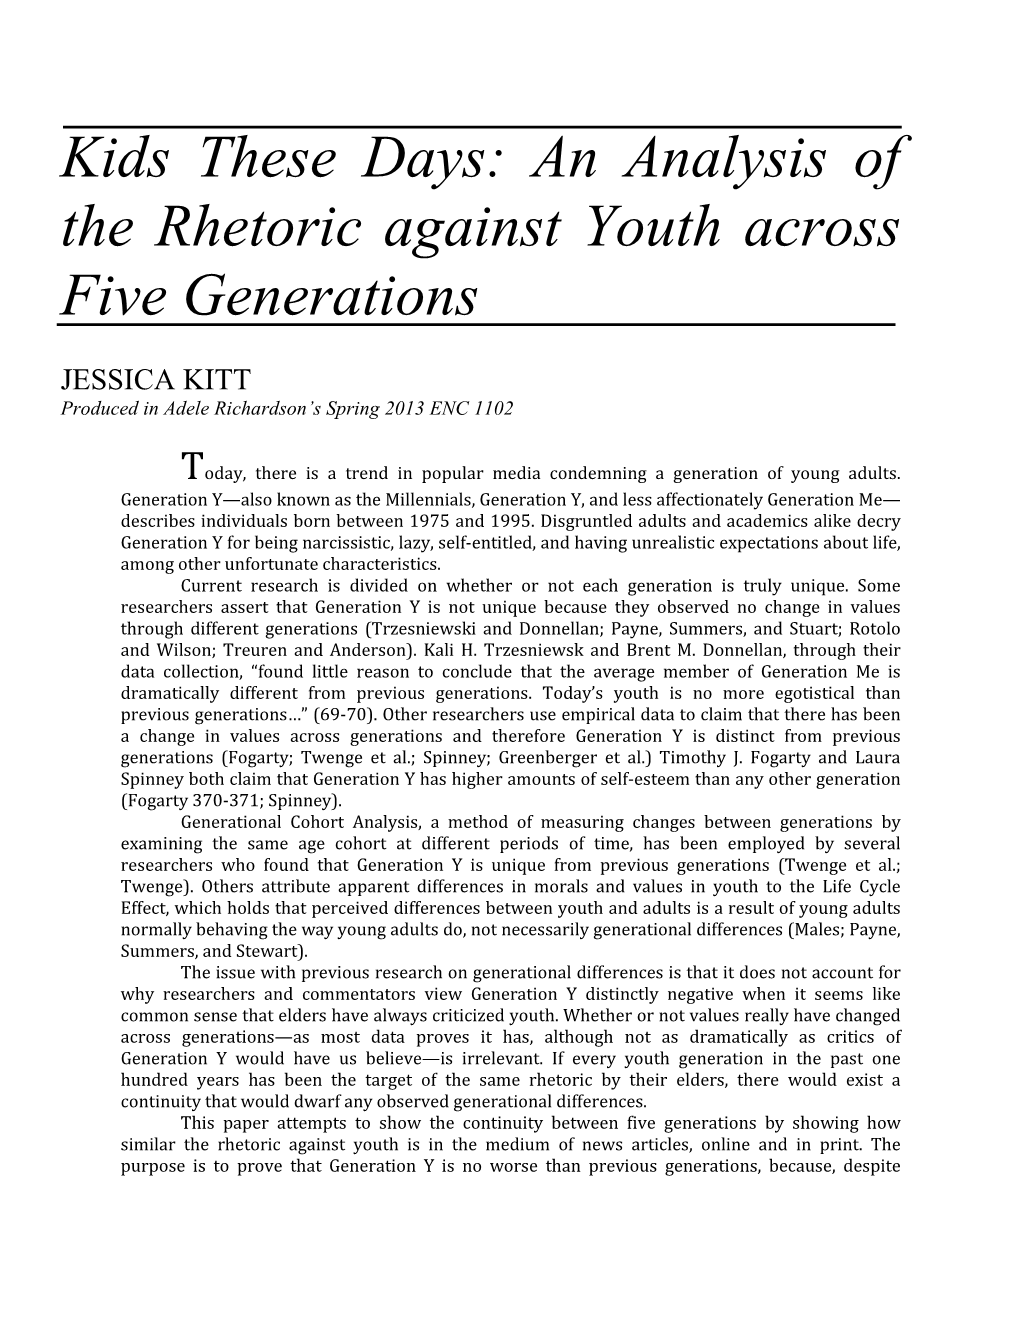 Kids These Days: an Analysis of the Rhetoric Against Youth Across Five Generations